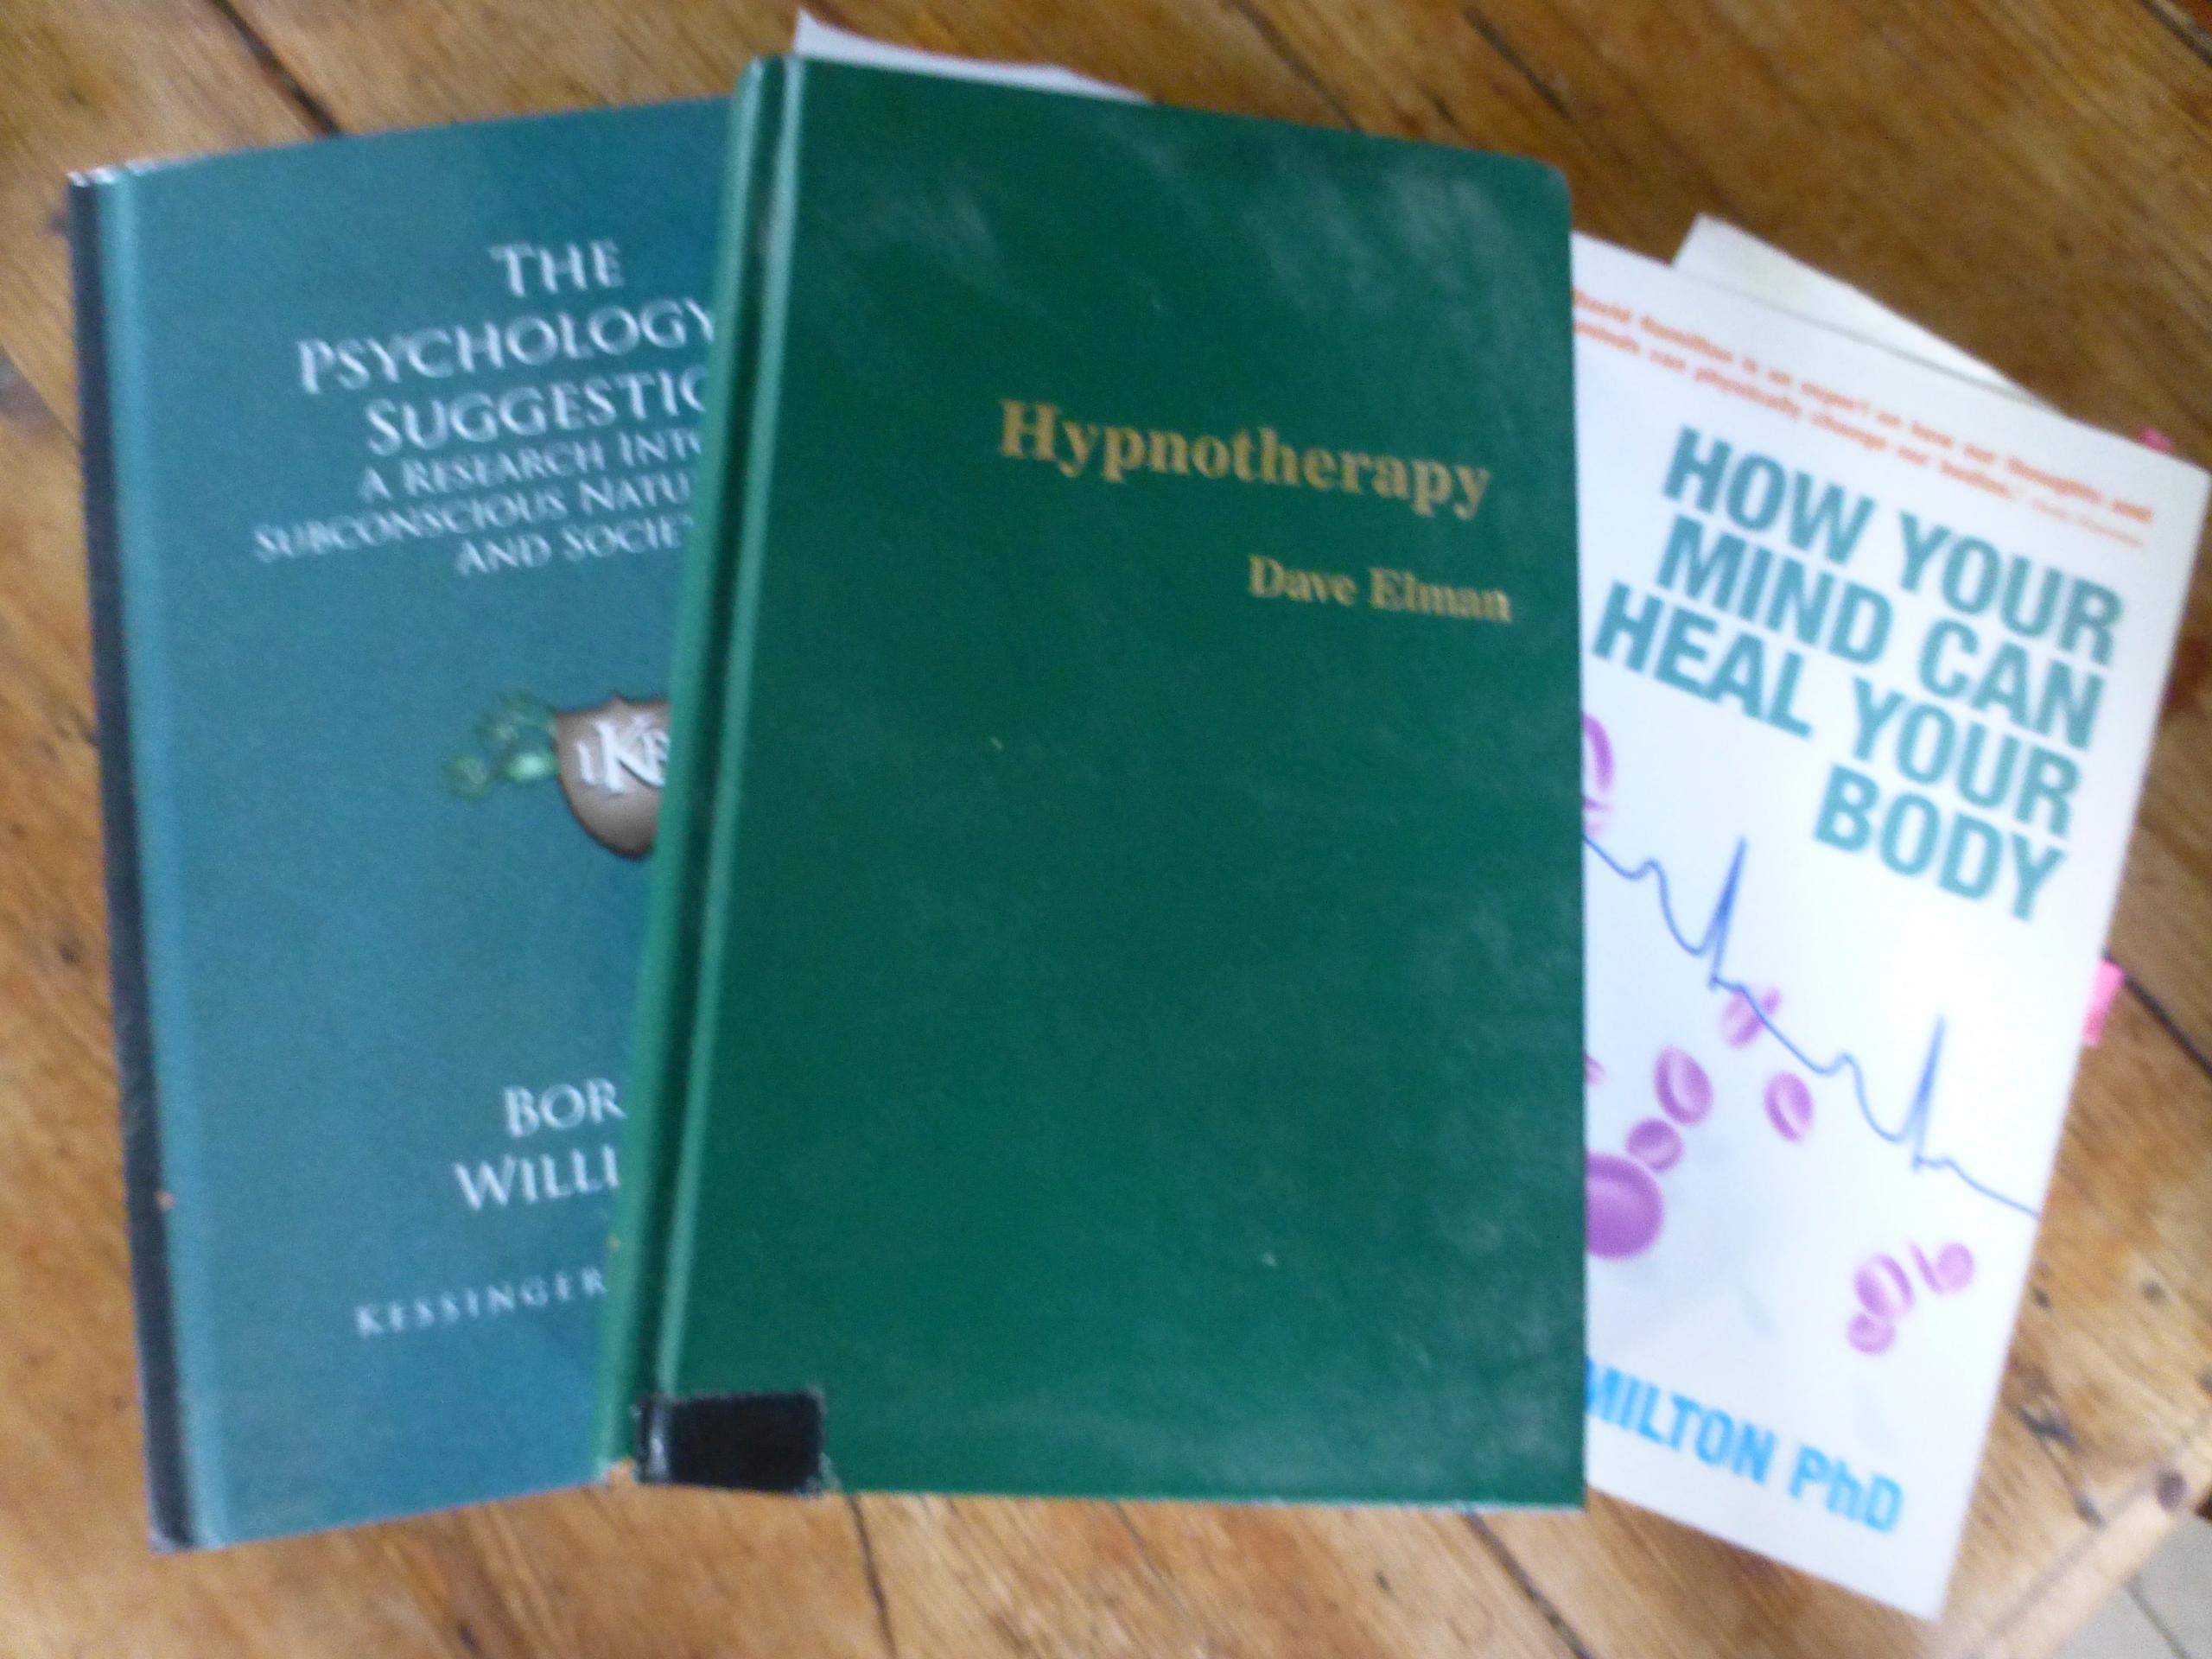 Hypnotherapy Text books